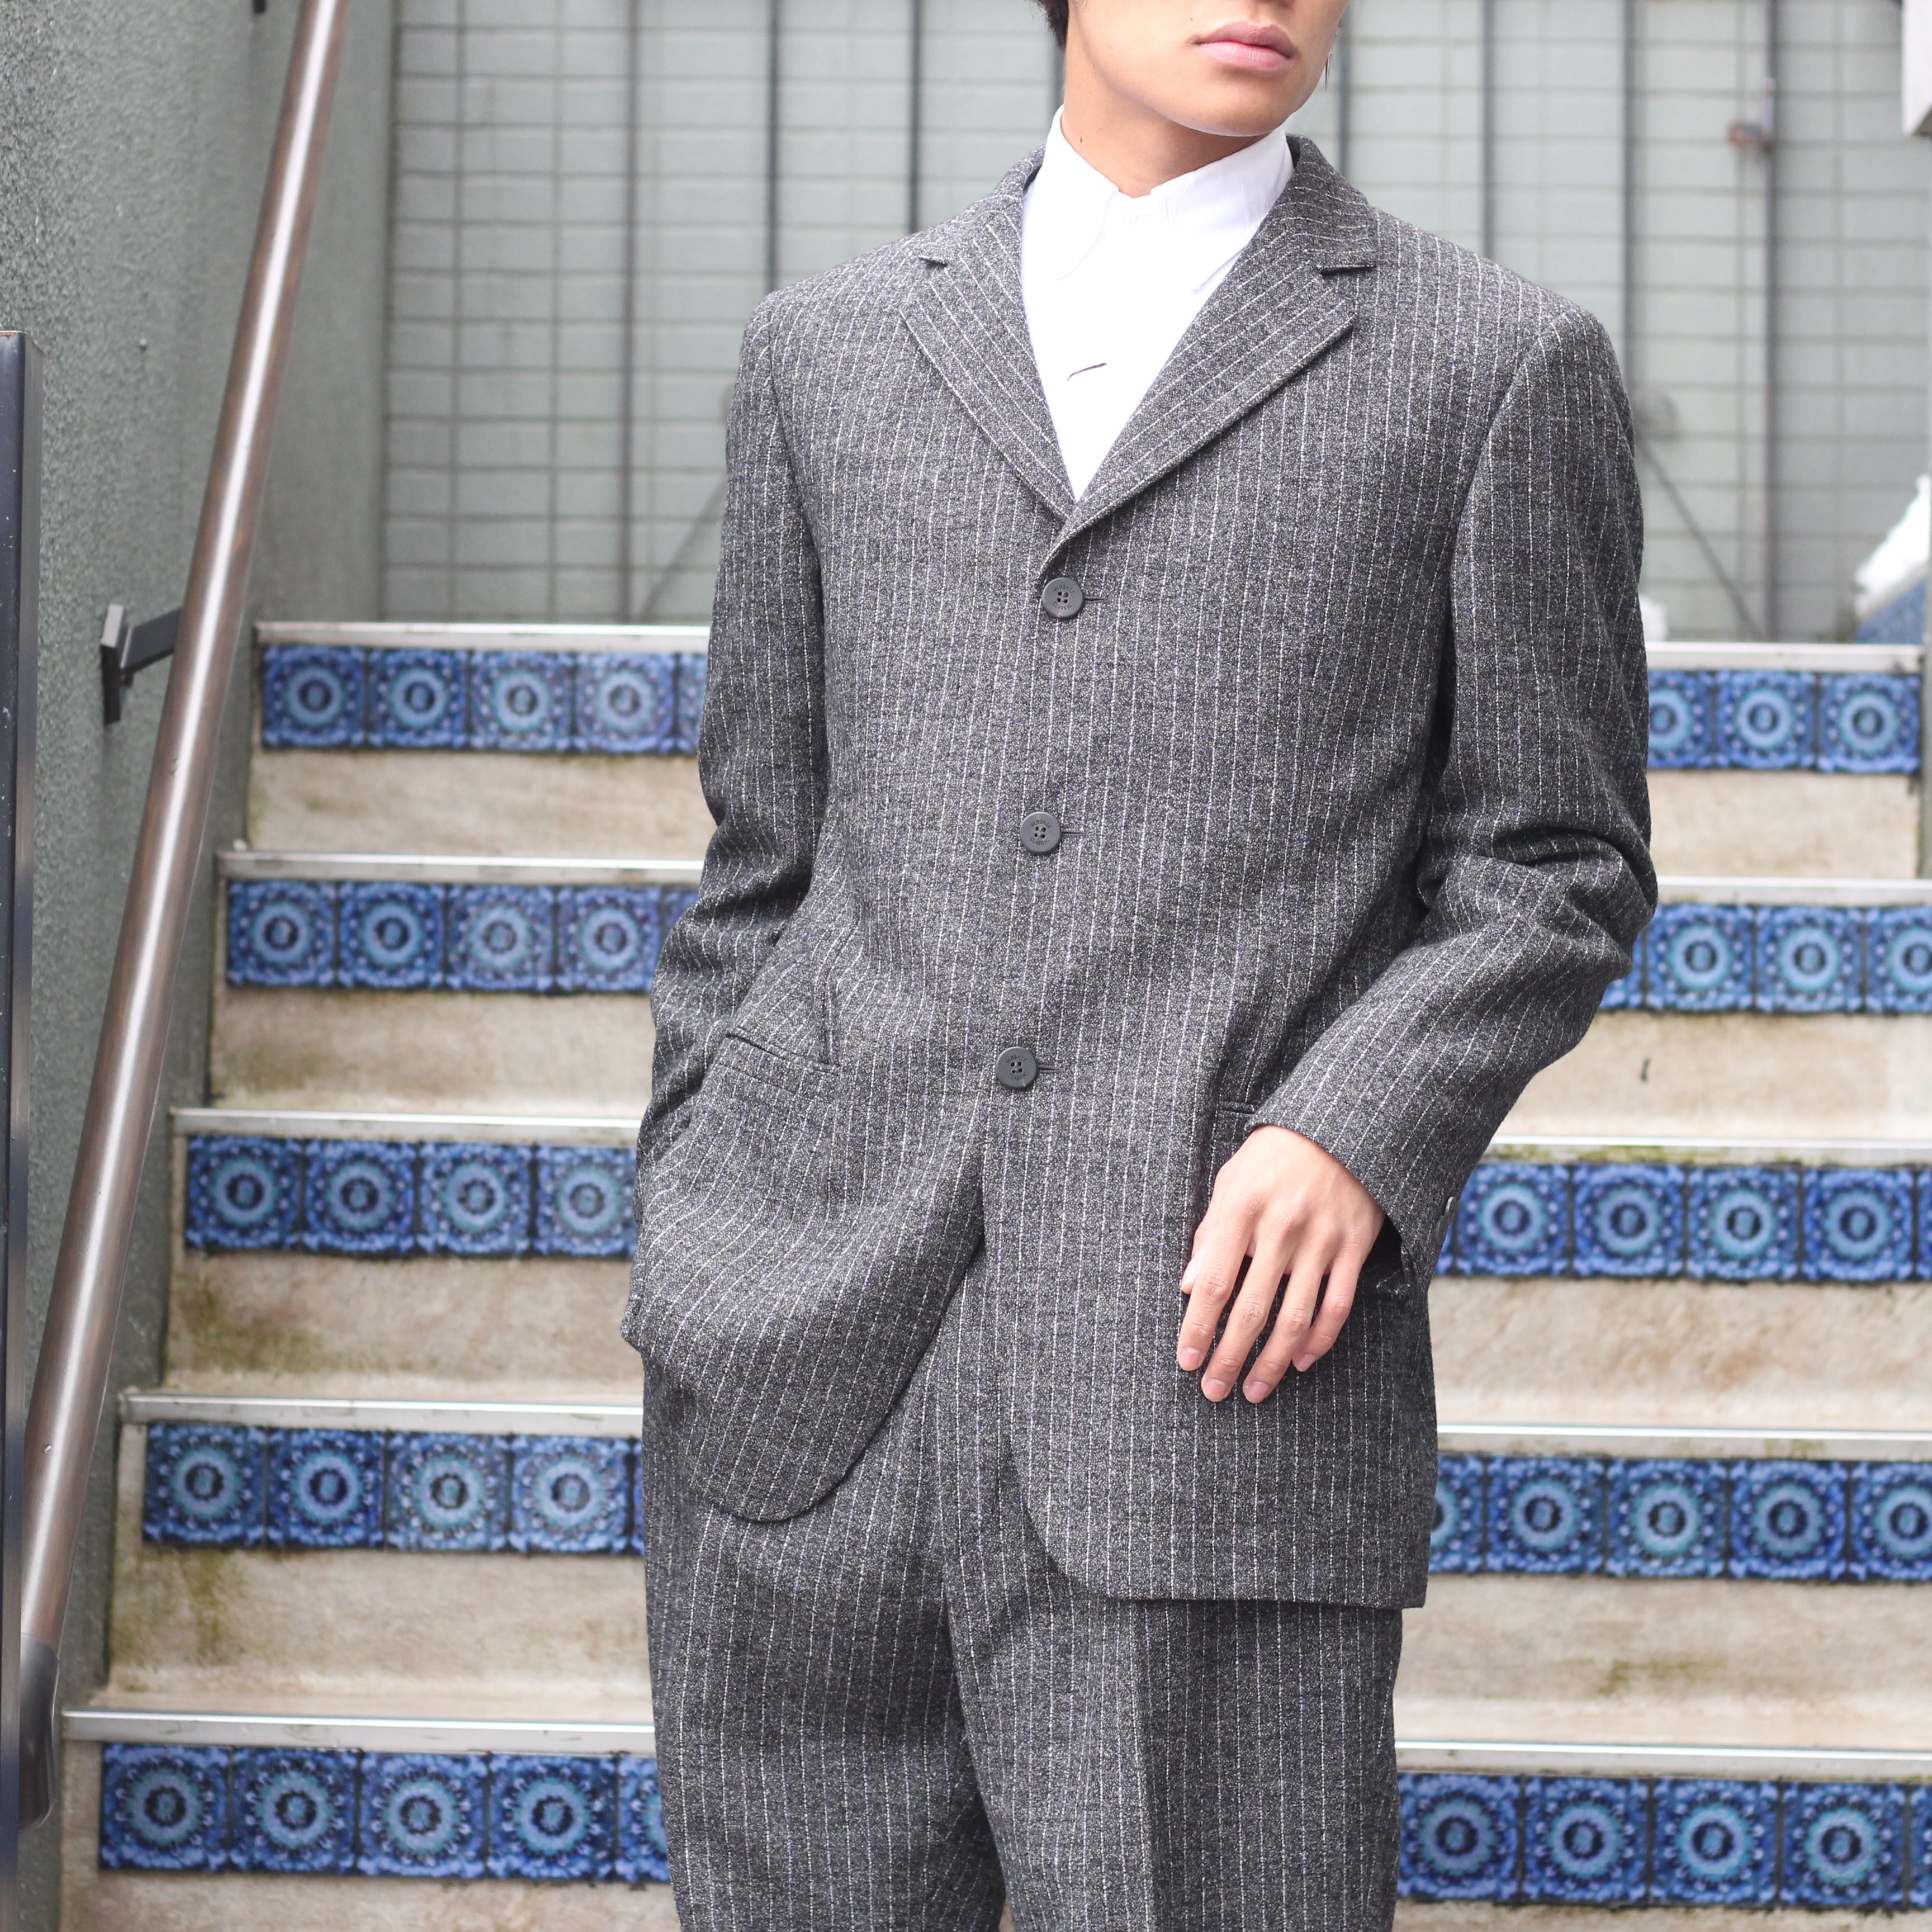 VERSACE CLASSIC WOOL STRIPE PATTERNED WOOL SET UP SUIT